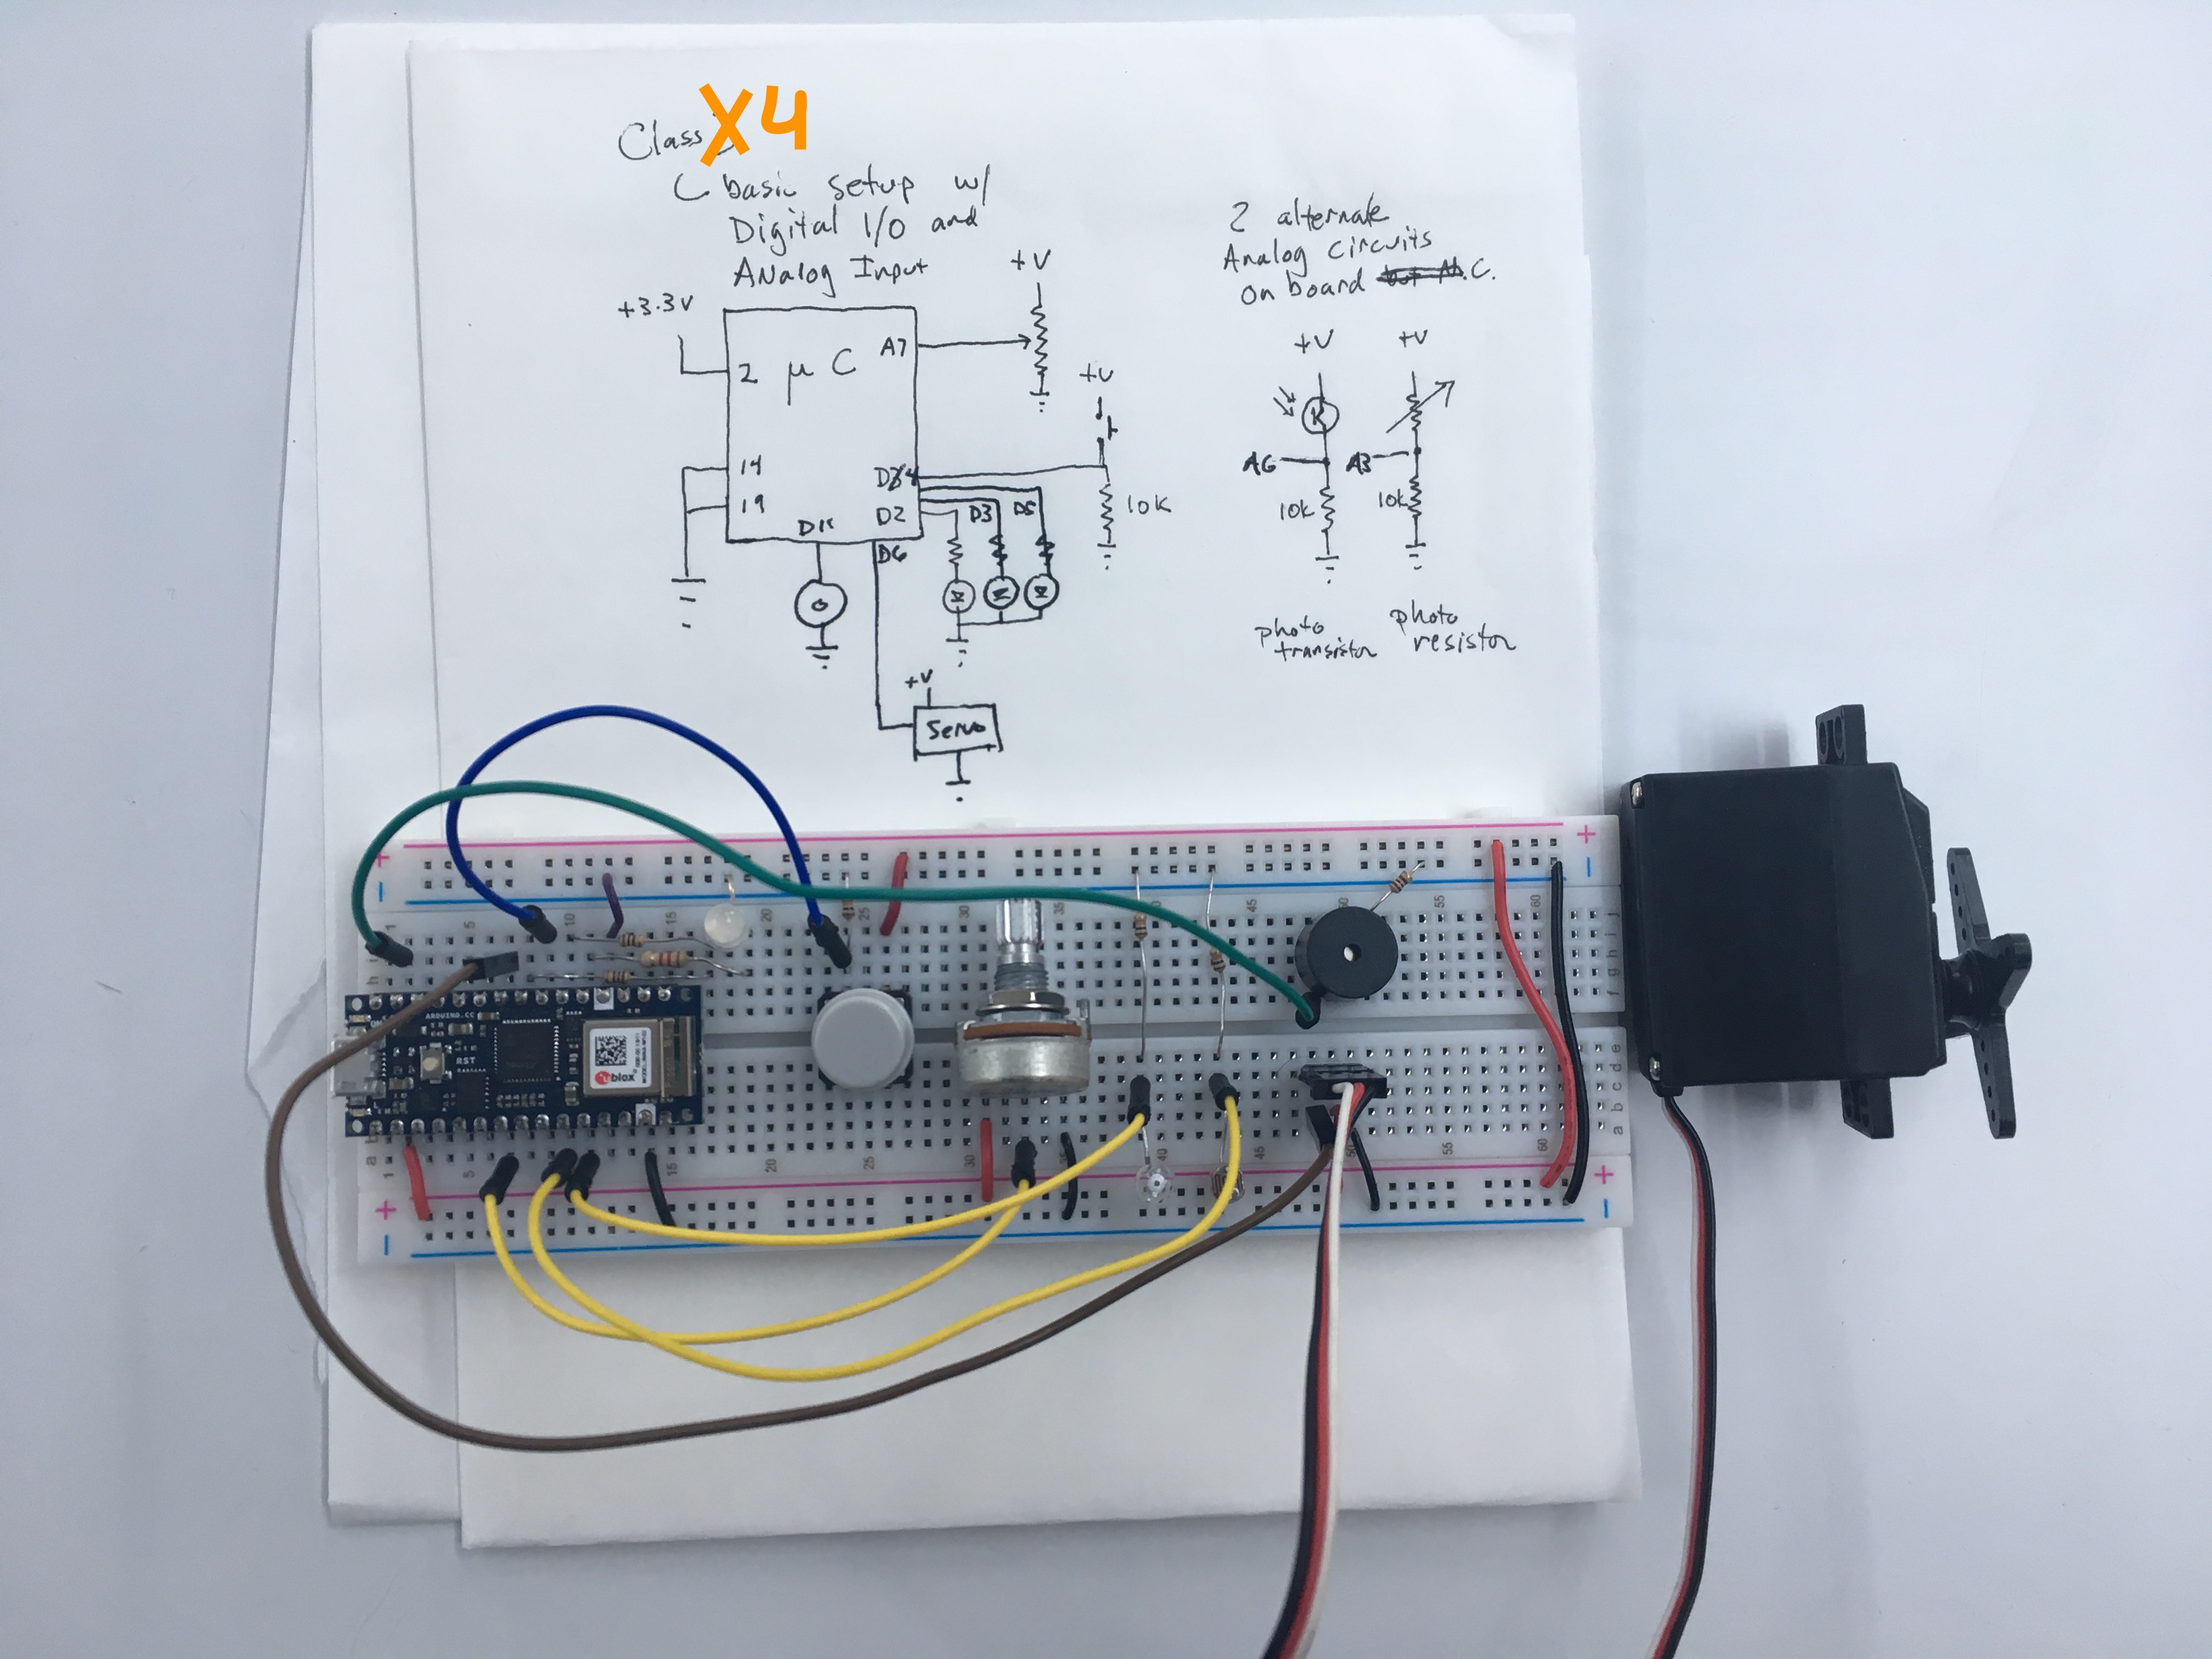 Class 4 Breadboard, extending circuit from class 3 above, adding servo, RGB led, and speaker.